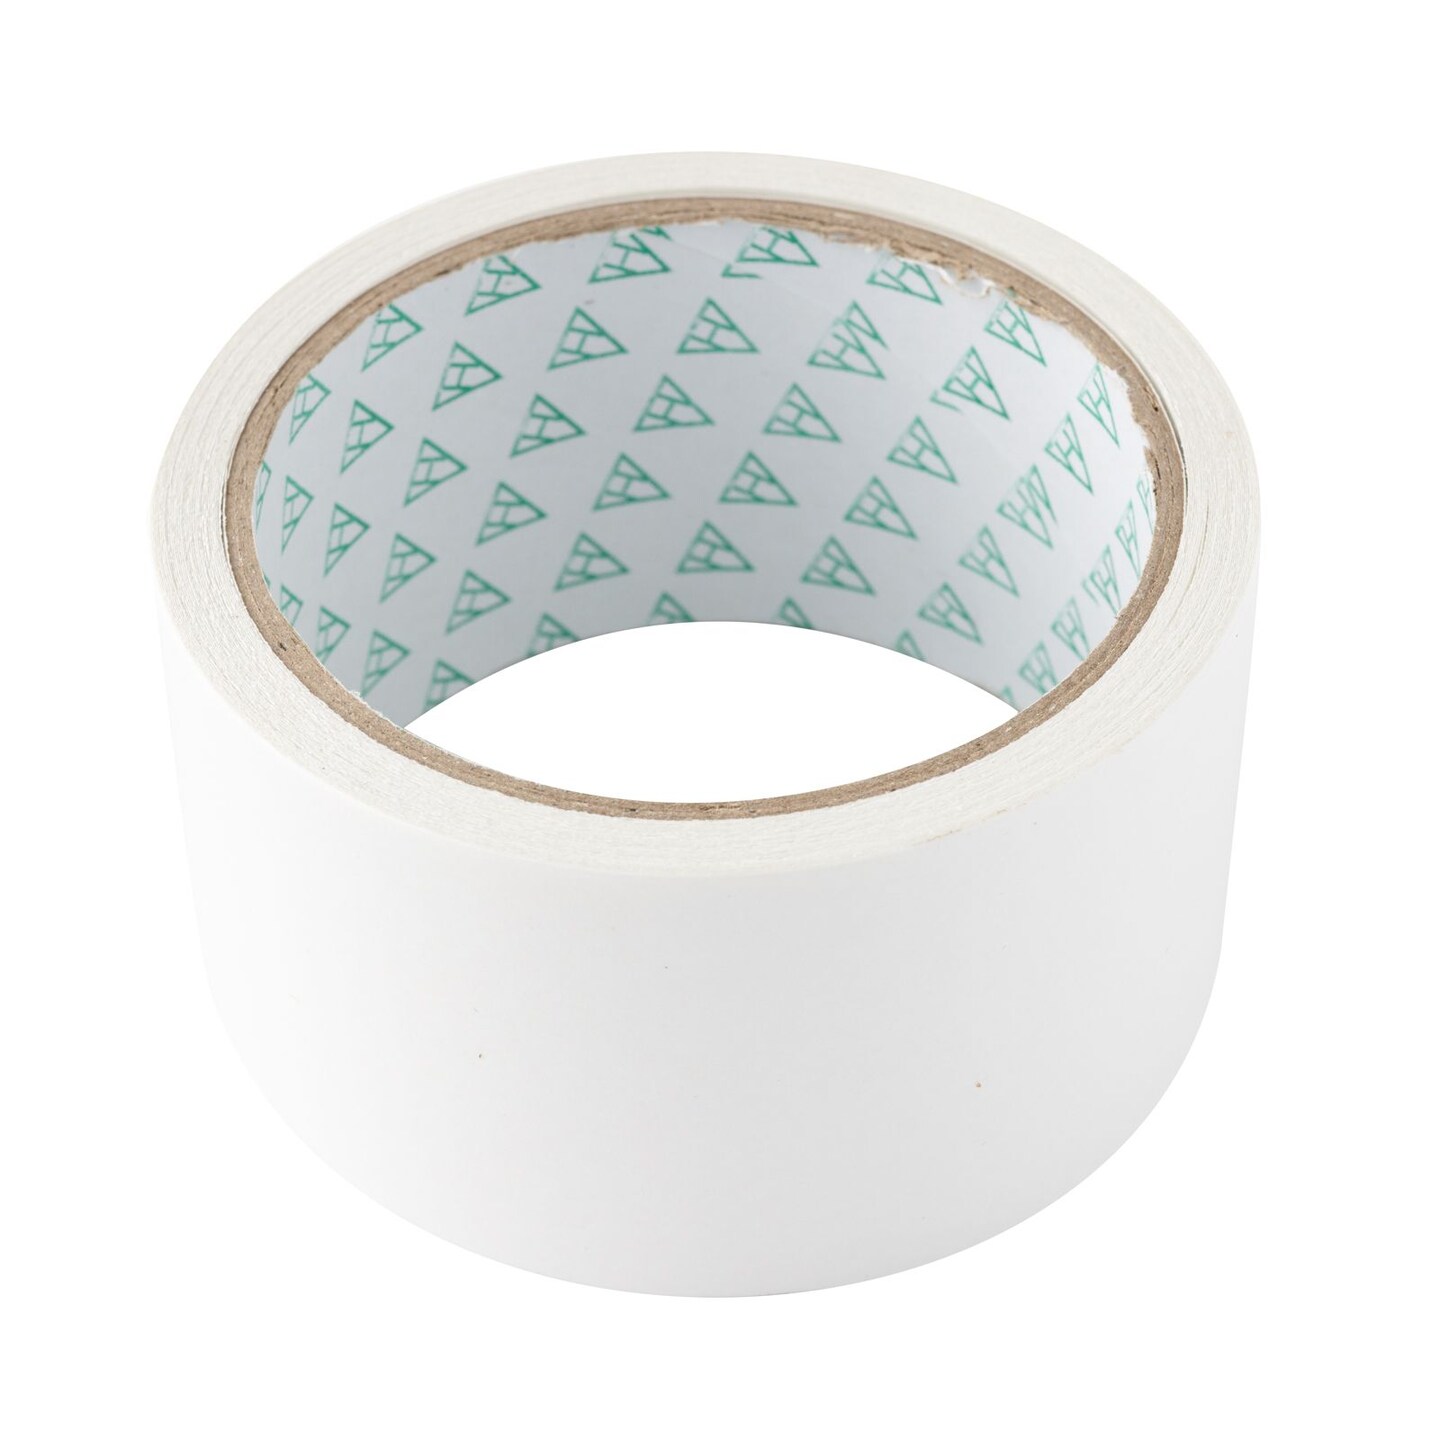 Sticky Thumb Double-Sided Tape 11 Yards-Clear, 2&#x22; - 60000308